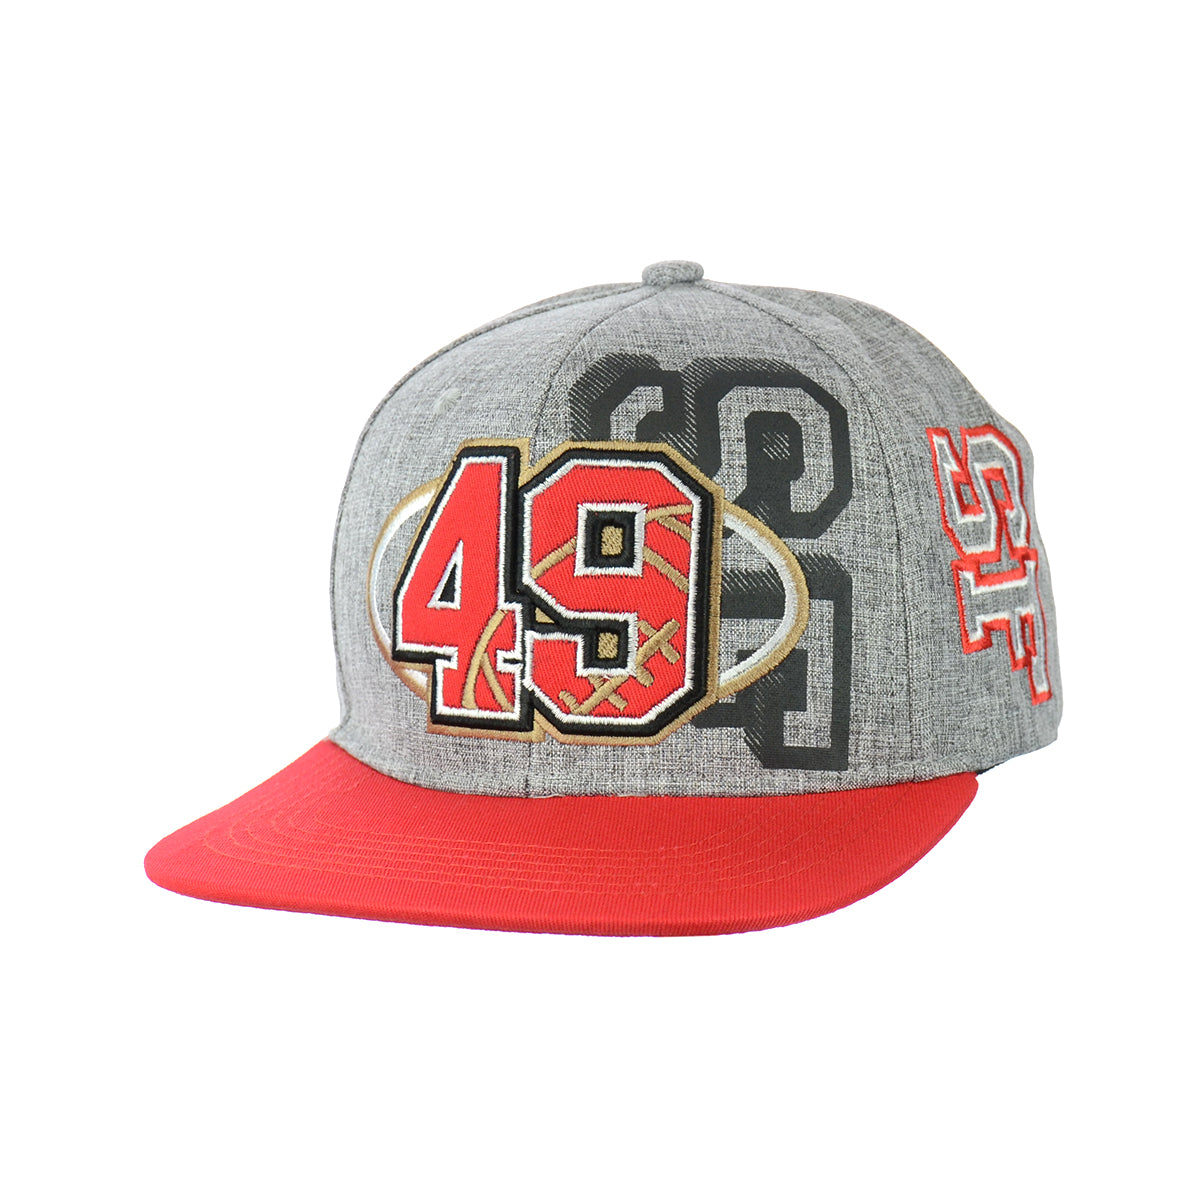 SF Hat Embroidered Snapback Hat